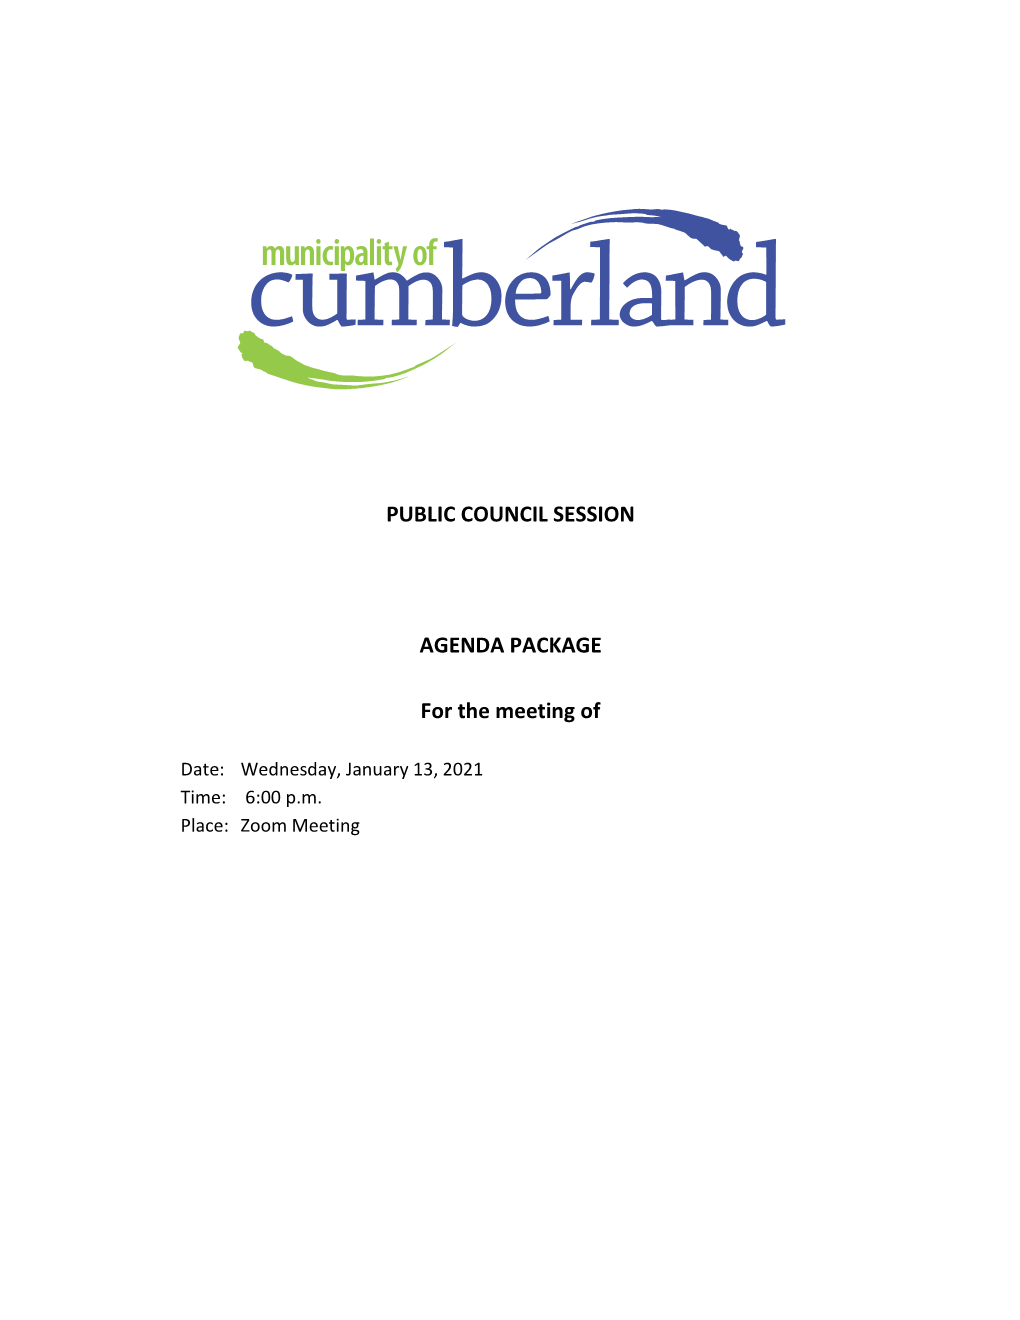 PUBLIC COUNCIL SESSION AGENDA PACKAGE for the Meeting Of